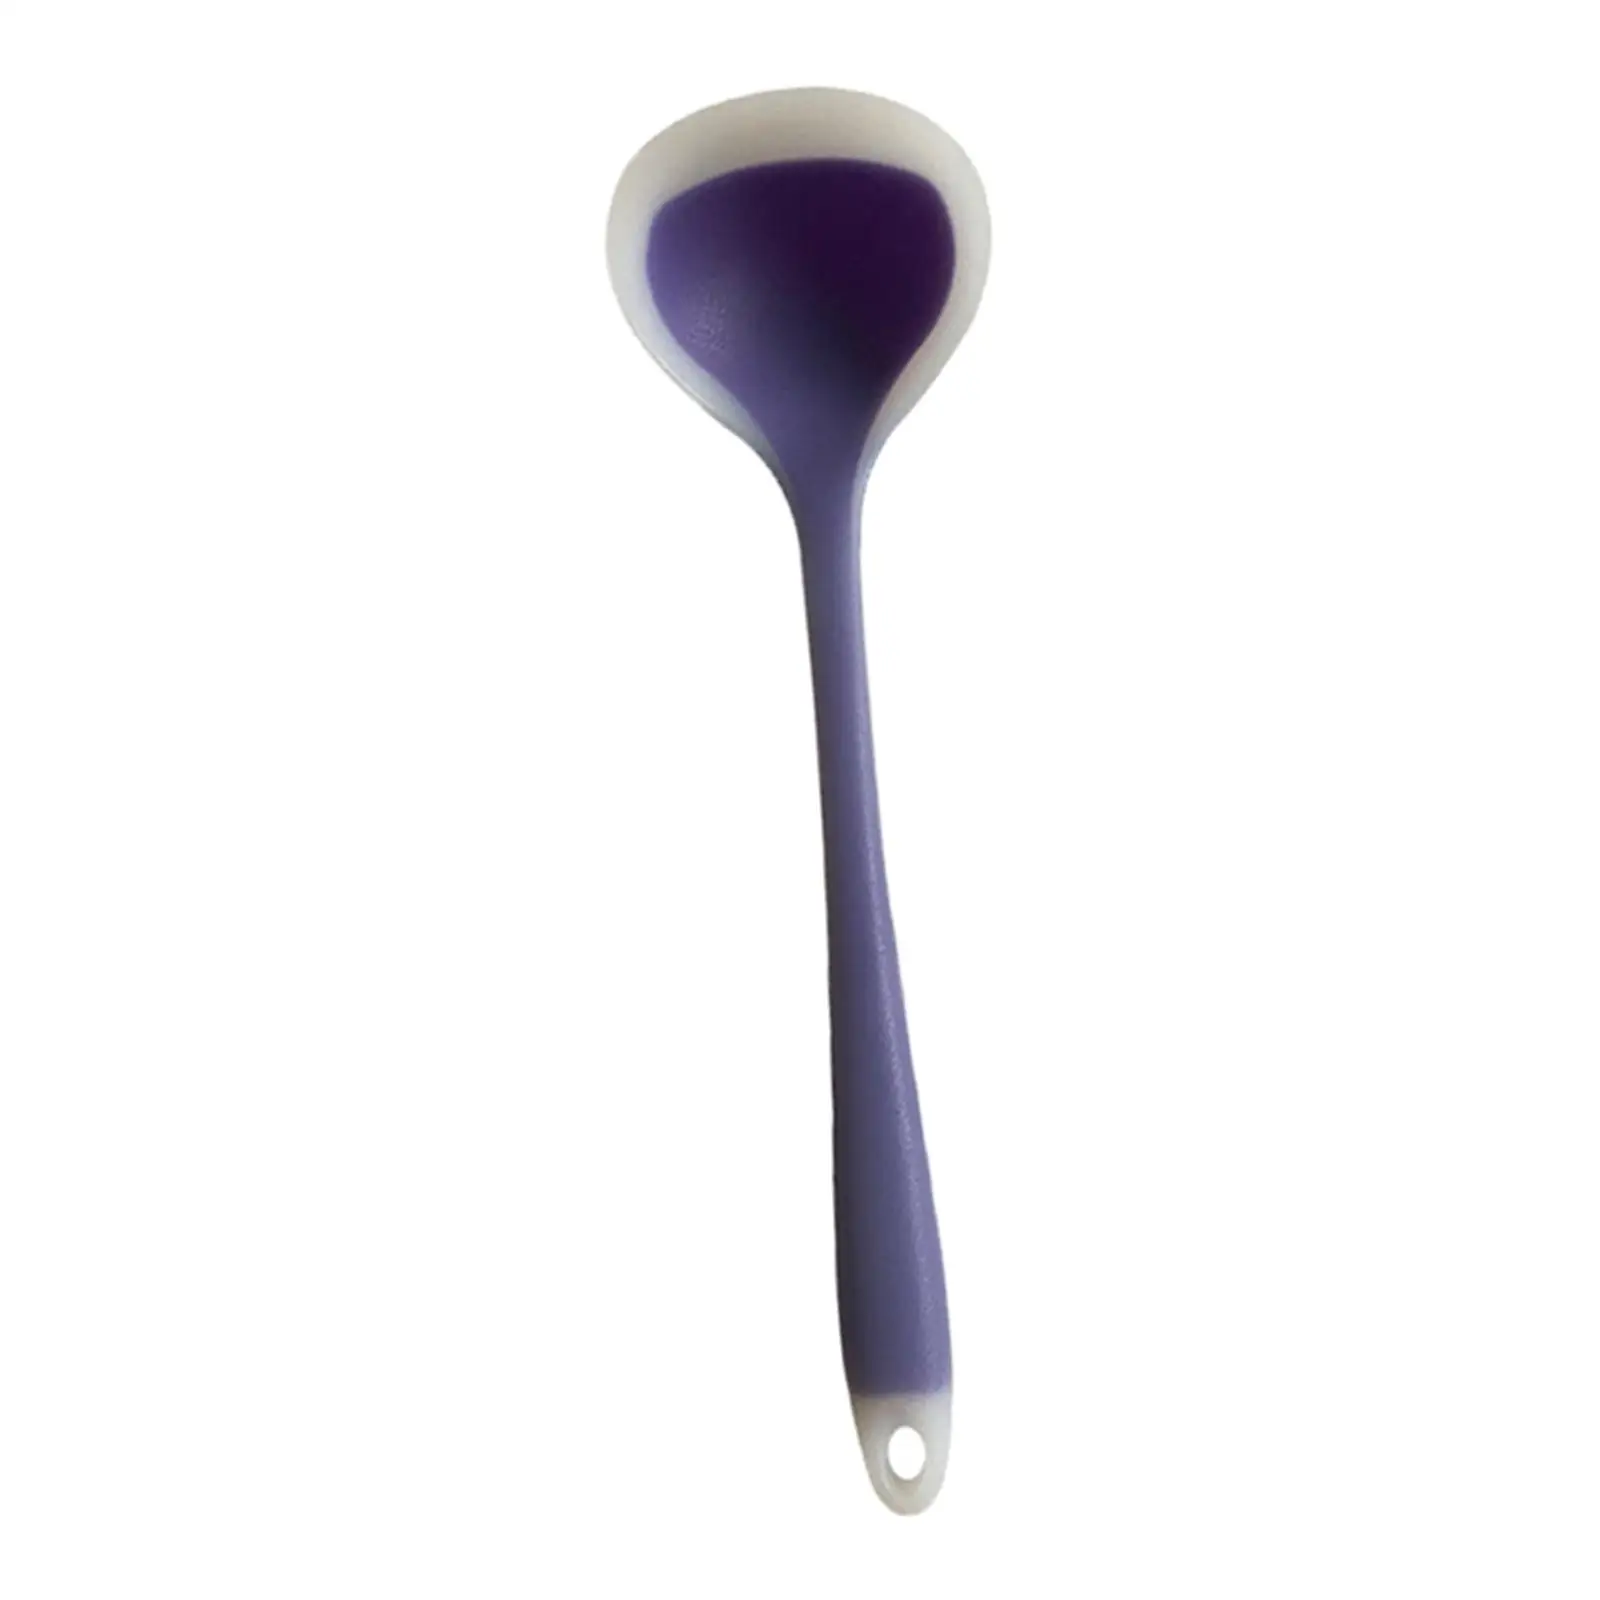 Heat Resistant Serving Spoon Flexible Silicone Soup Spoon Stirring Spoon for Stirring Cooking